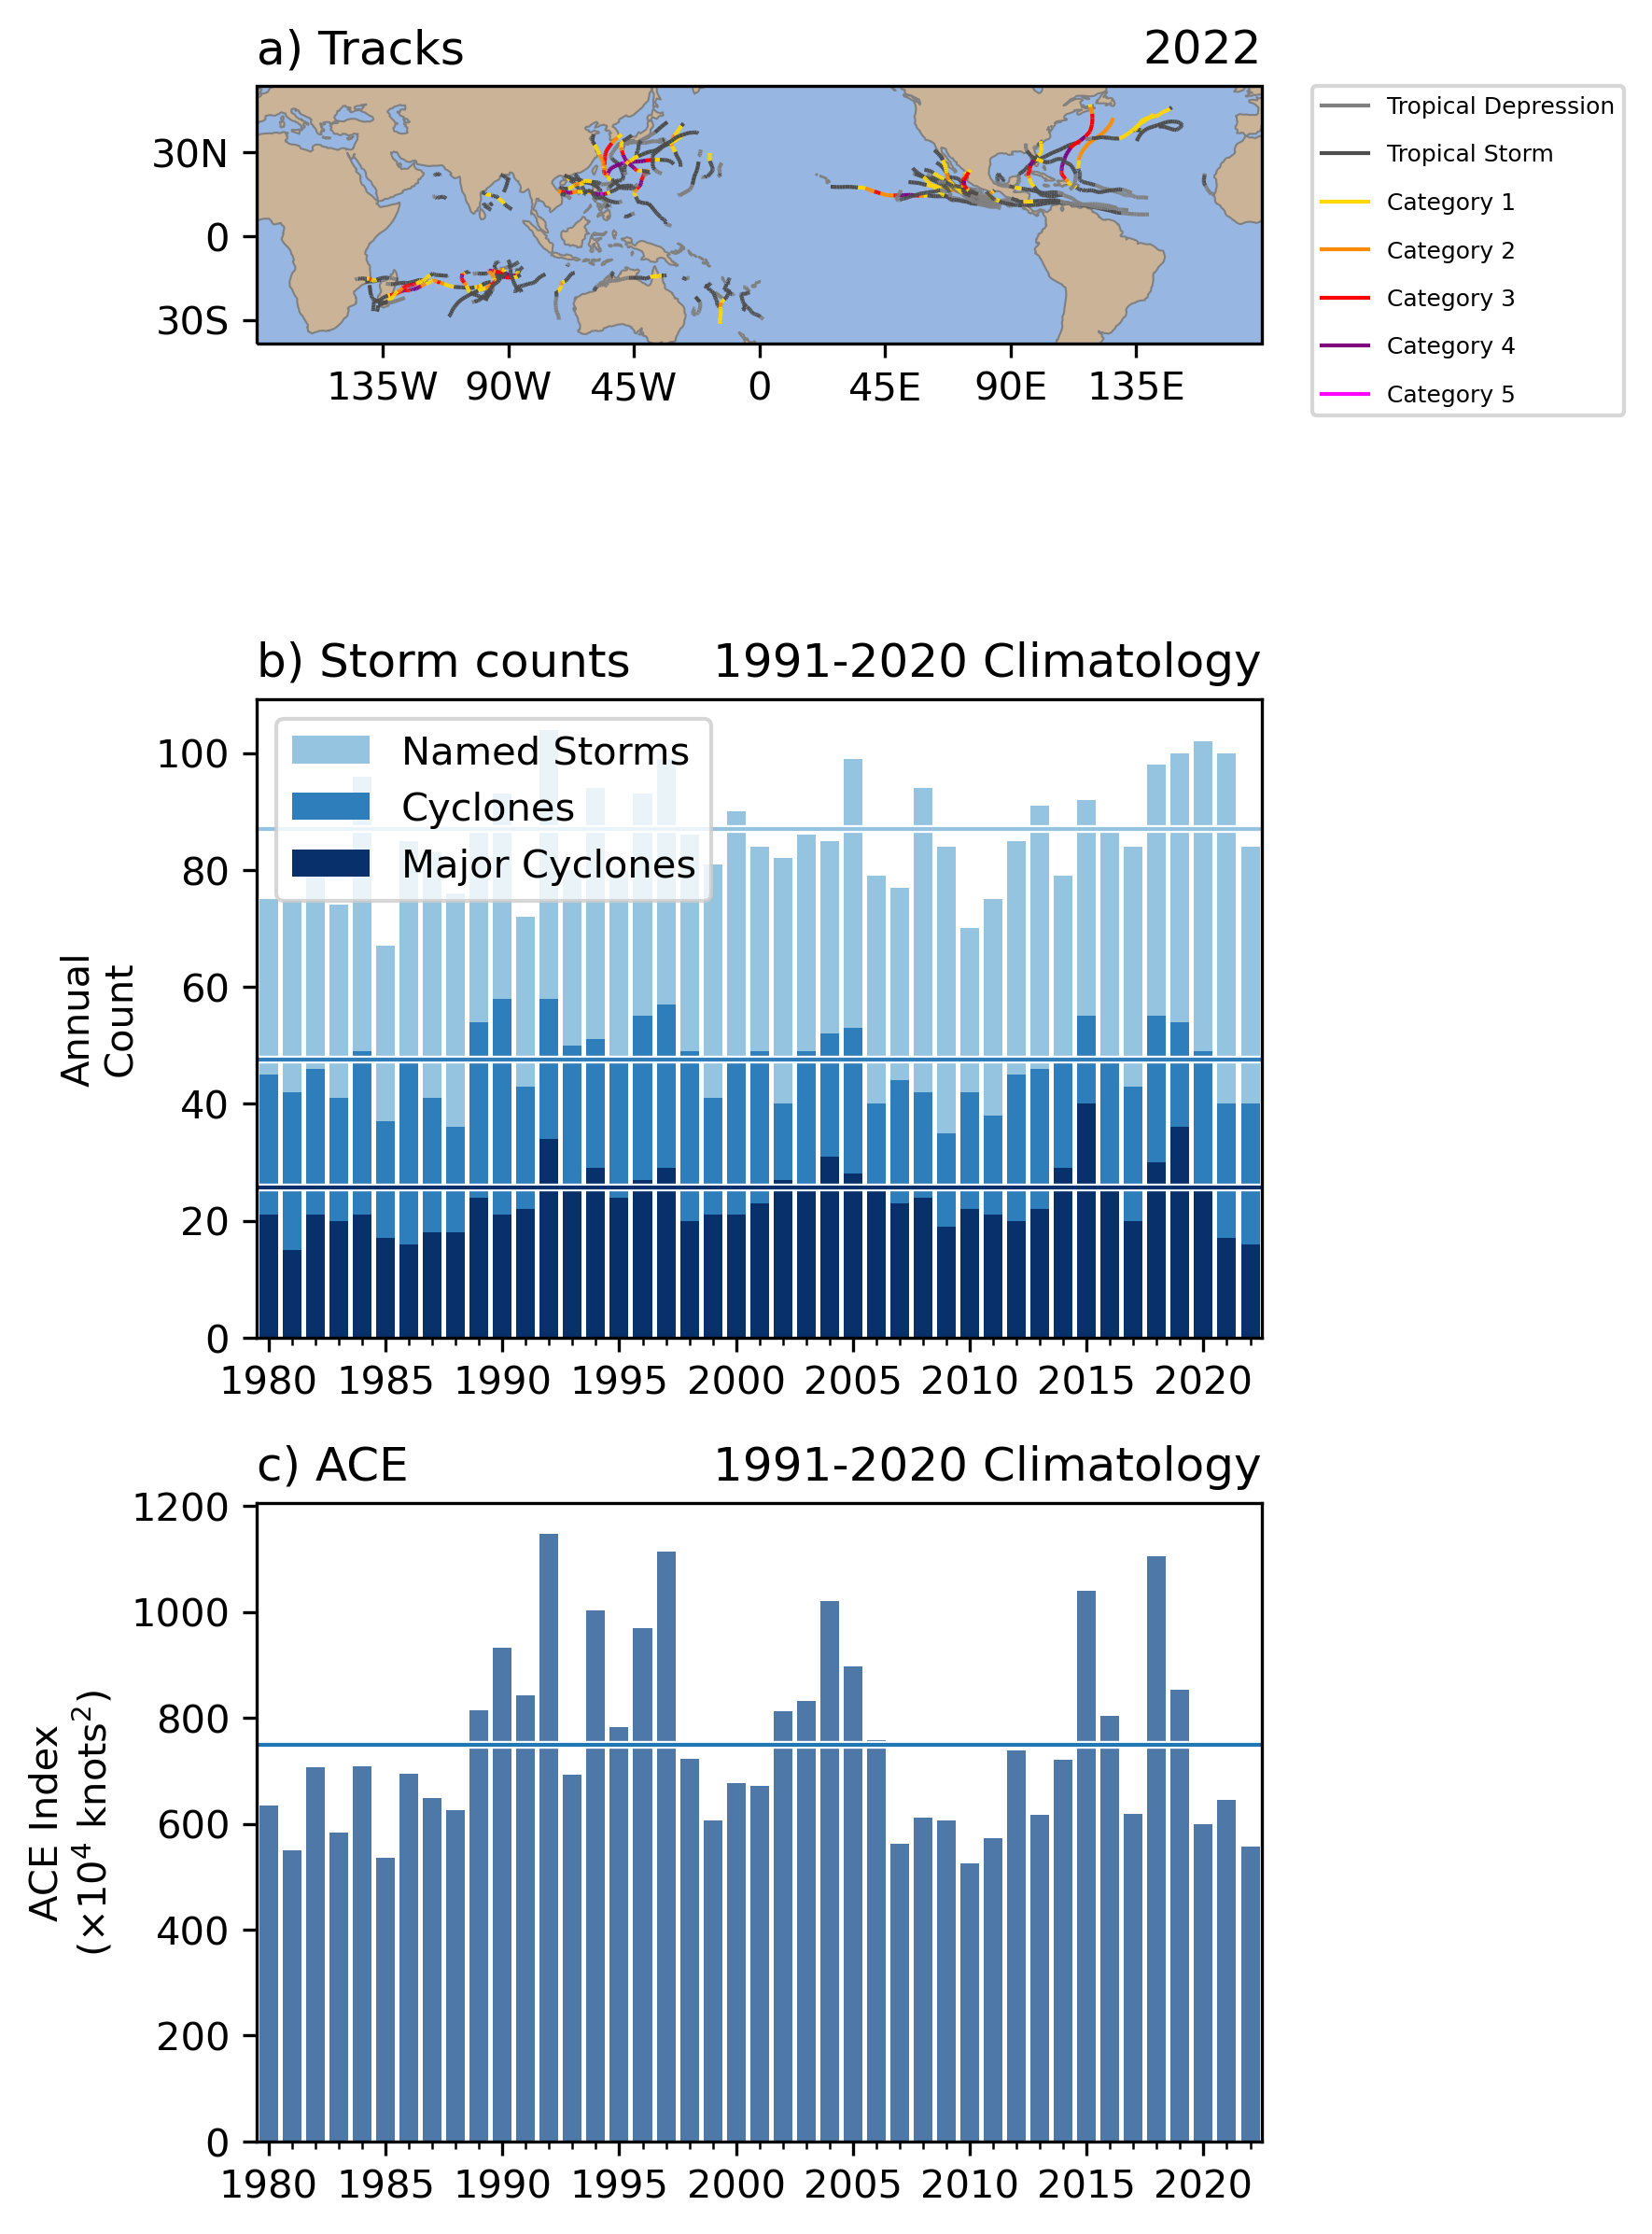 Map of 2022 global tropical cyclone tracks and annual statistics for global tropical cyclone activity. Horizontal lines represent the 1991-2020 climatology.